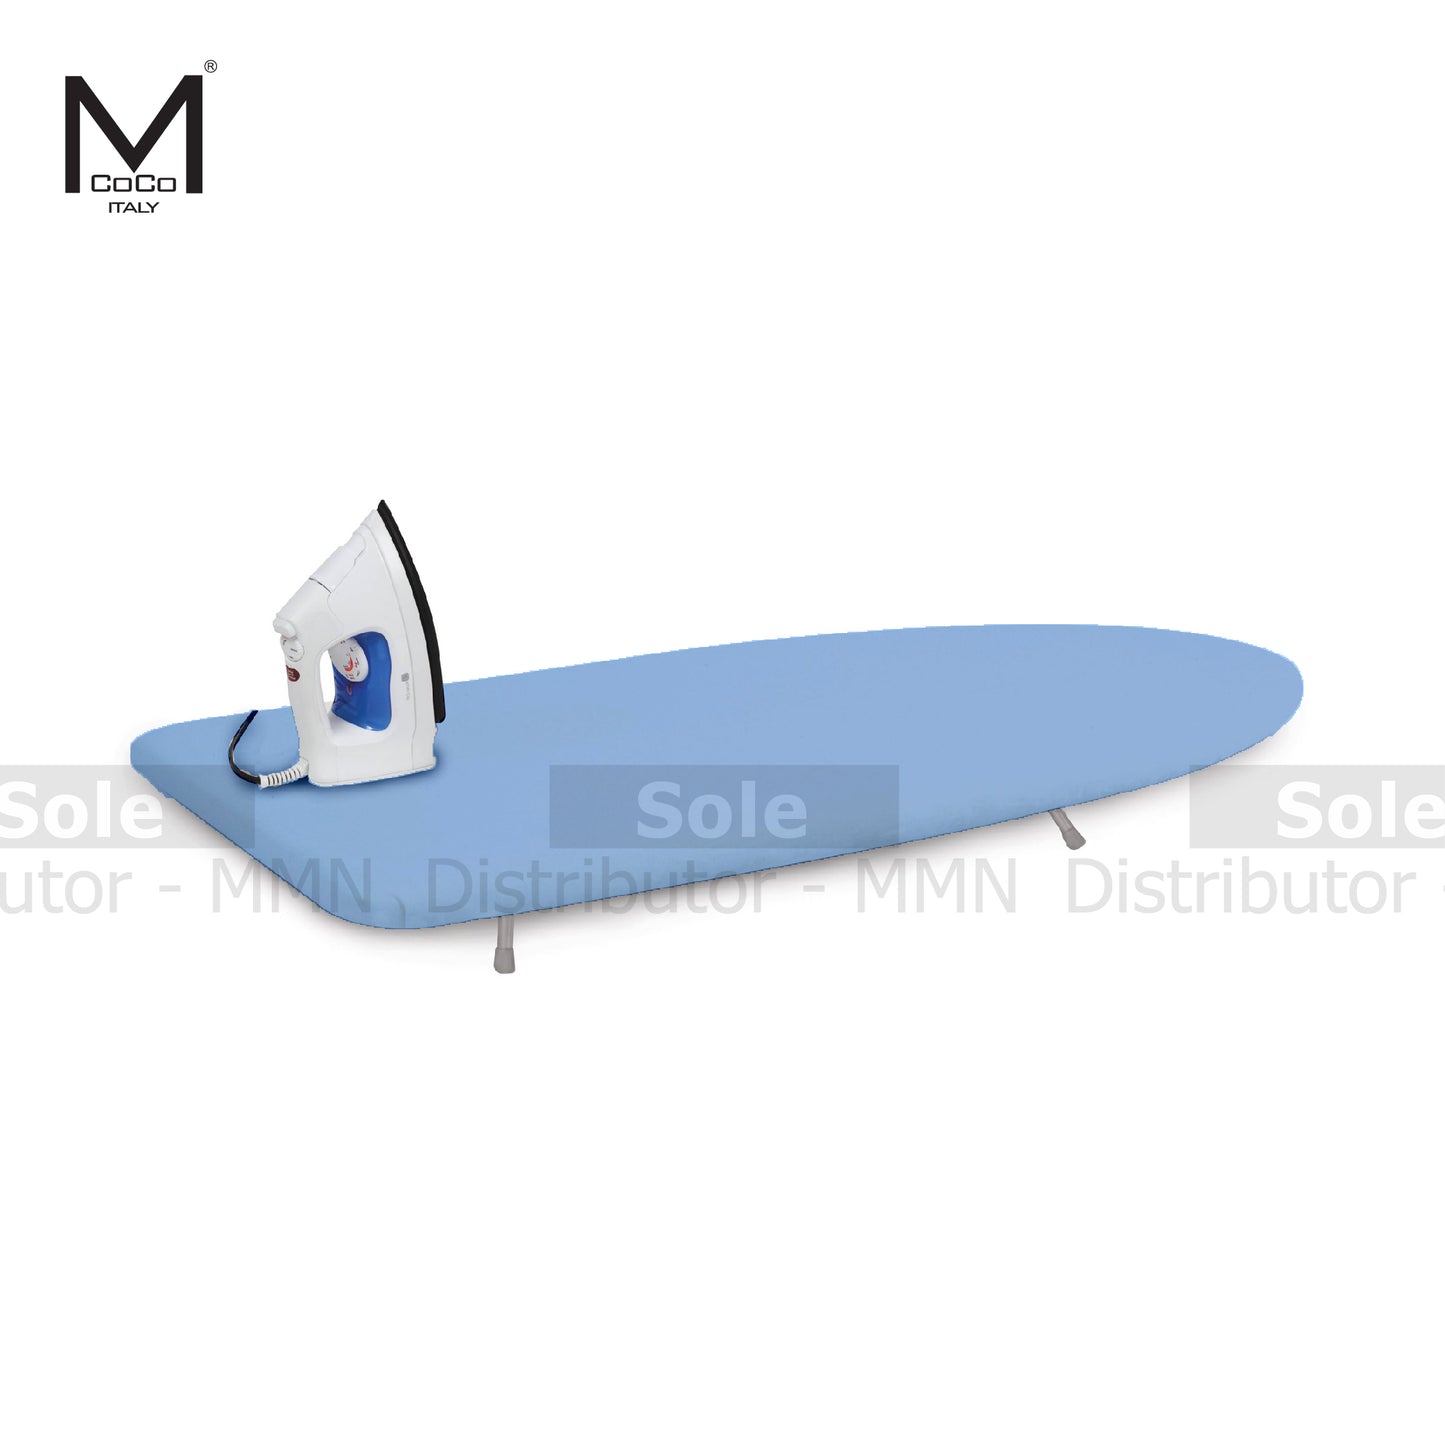 Mcoco Table Top Ironing Board Size 79x30cm Blue Colour - KRS1230W-8